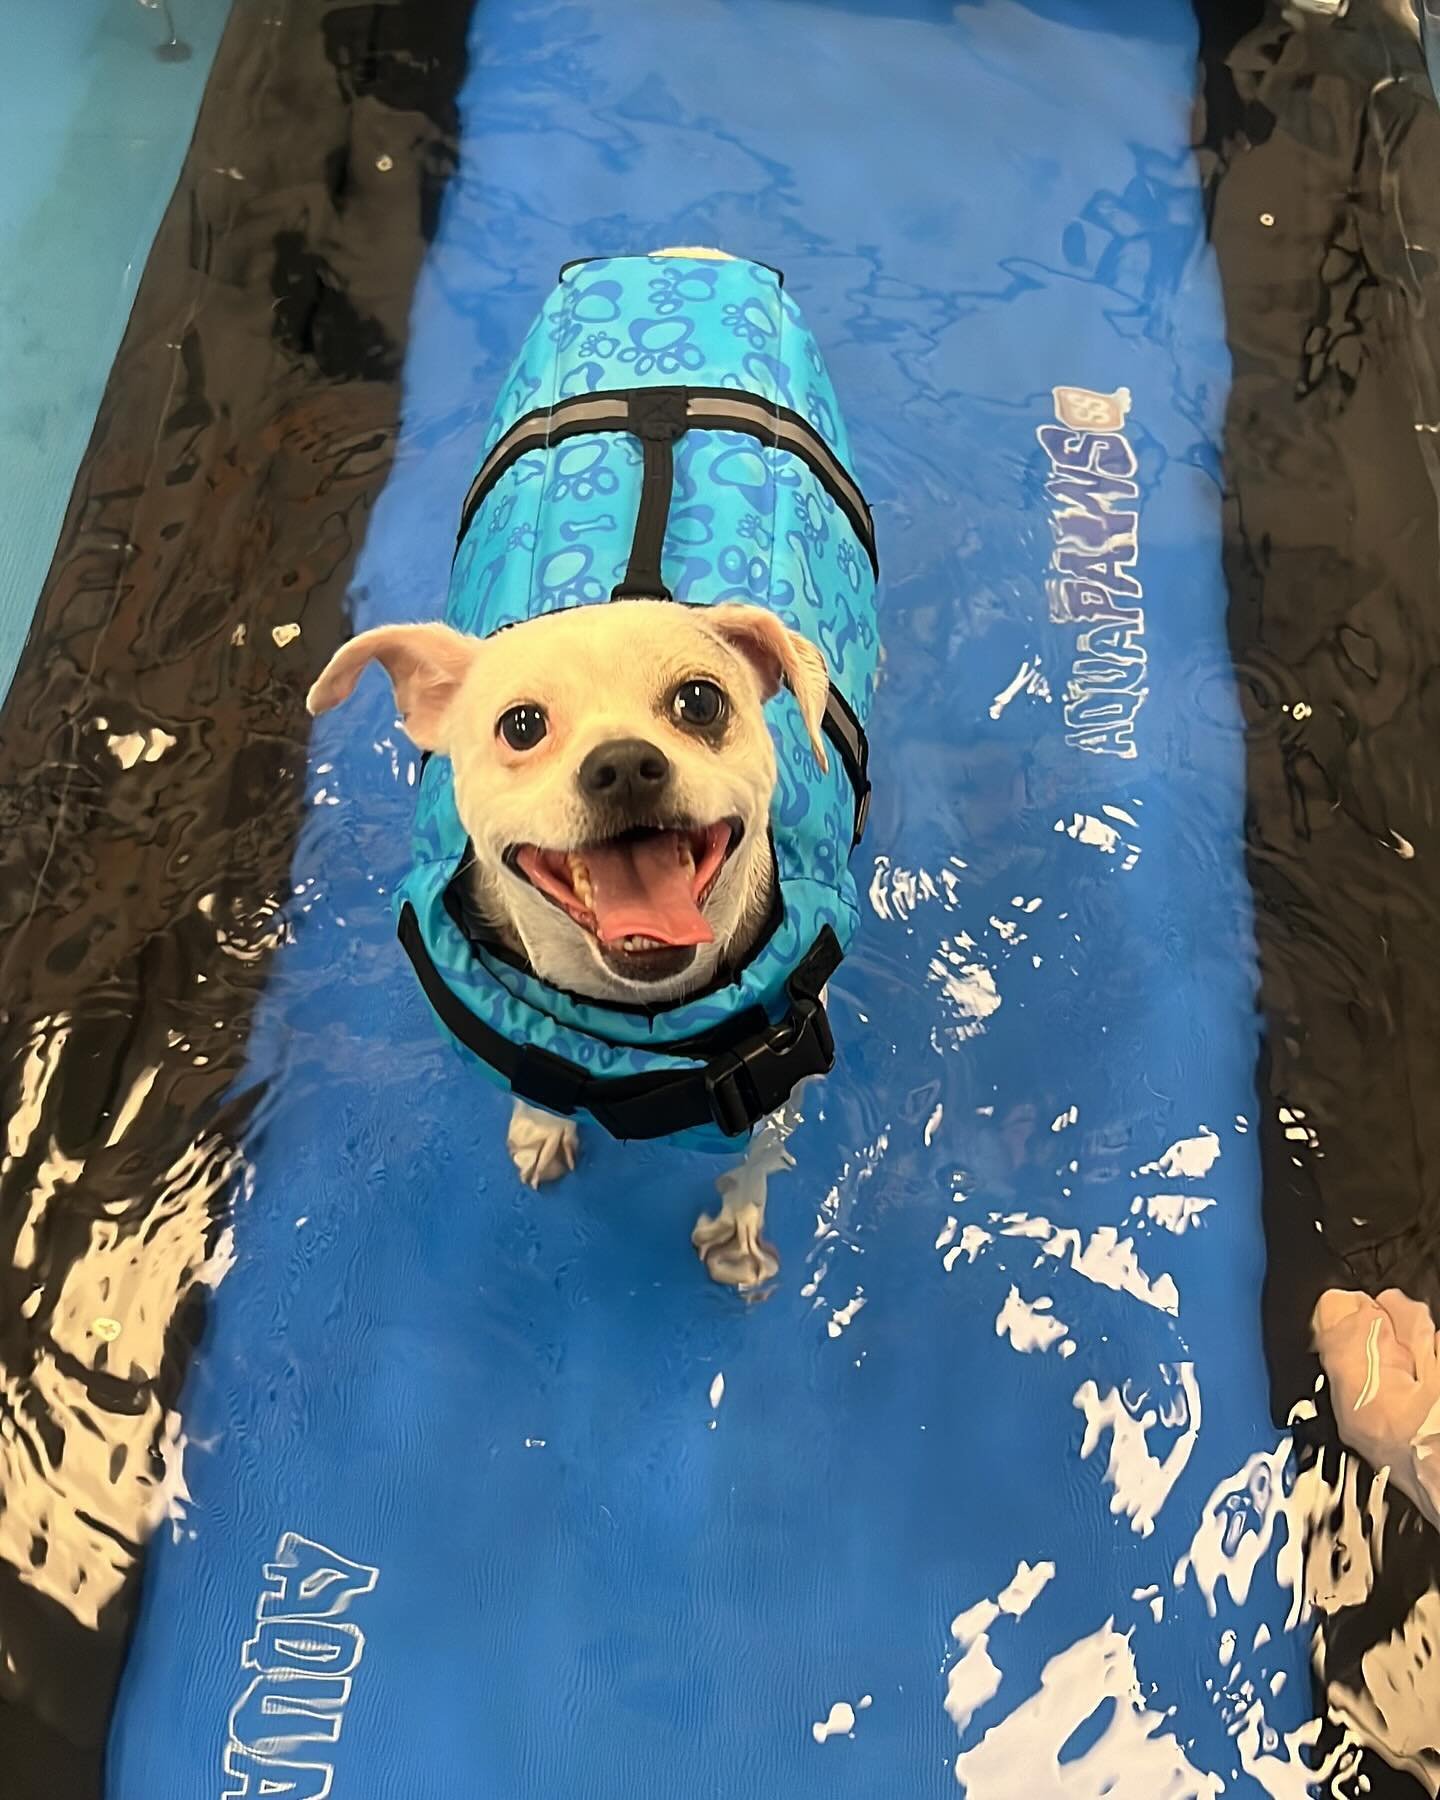 Little Sunny is losing weight with hydrotherapy! 💙💦 And tomorrow is his birthday! ⭐️ Sunny gets a gold star, I&rsquo;m so proud of him!
. 
#weightlossjourney #chihuahualove #barkinghampethotel #rescuedtailsmassage #chihuahuamix